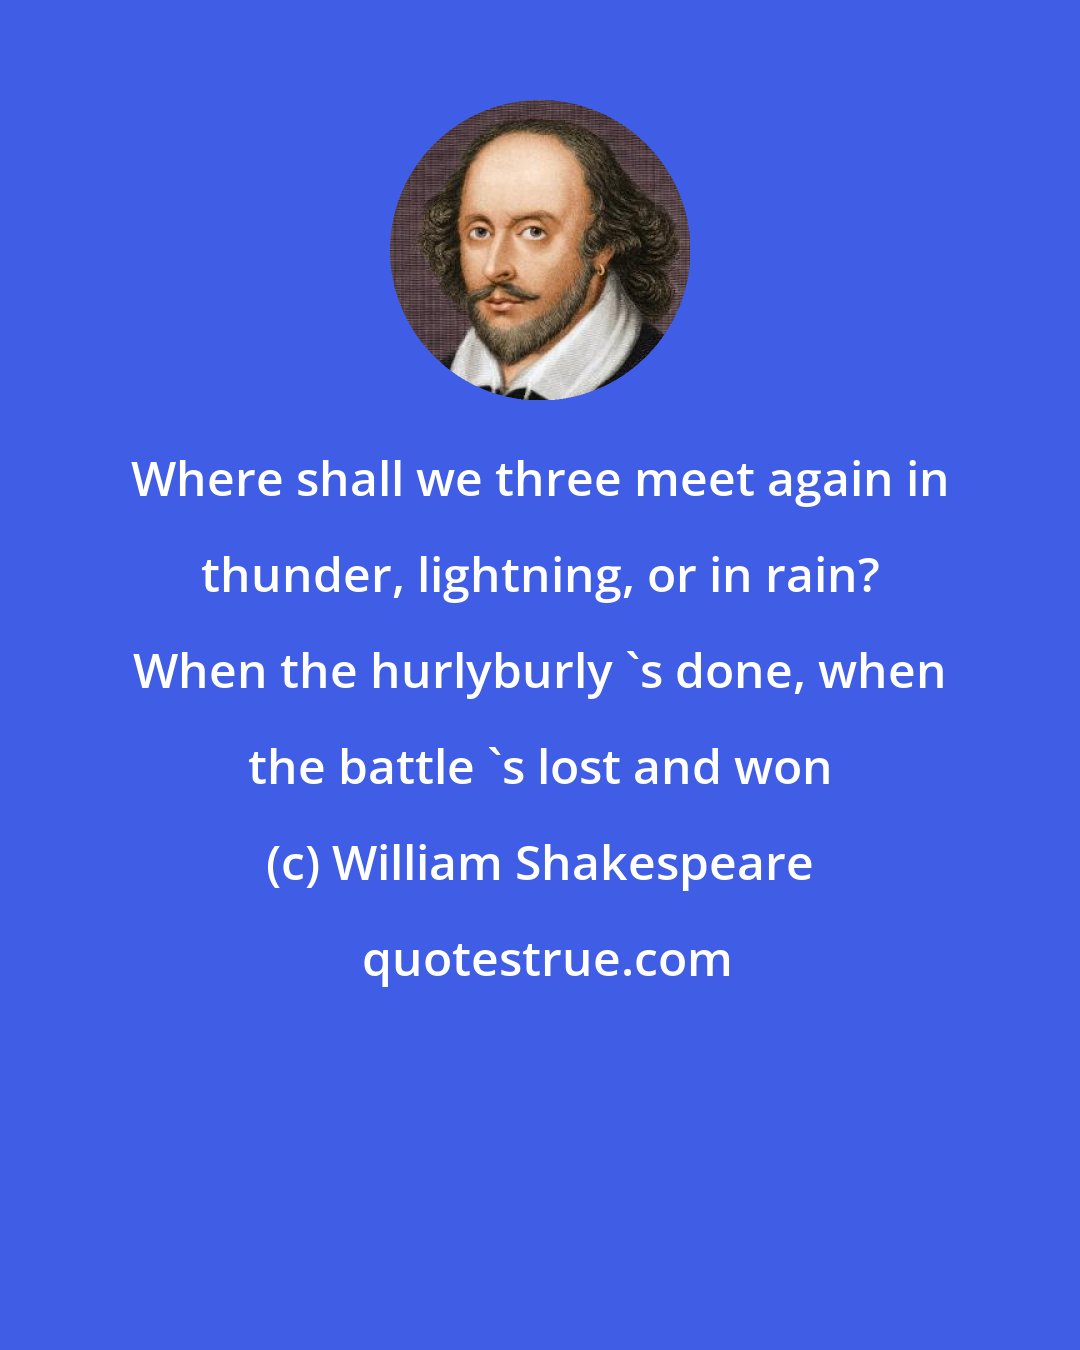 William Shakespeare: Where shall we three meet again in thunder, lightning, or in rain? When the hurlyburly 's done, when the battle 's lost and won